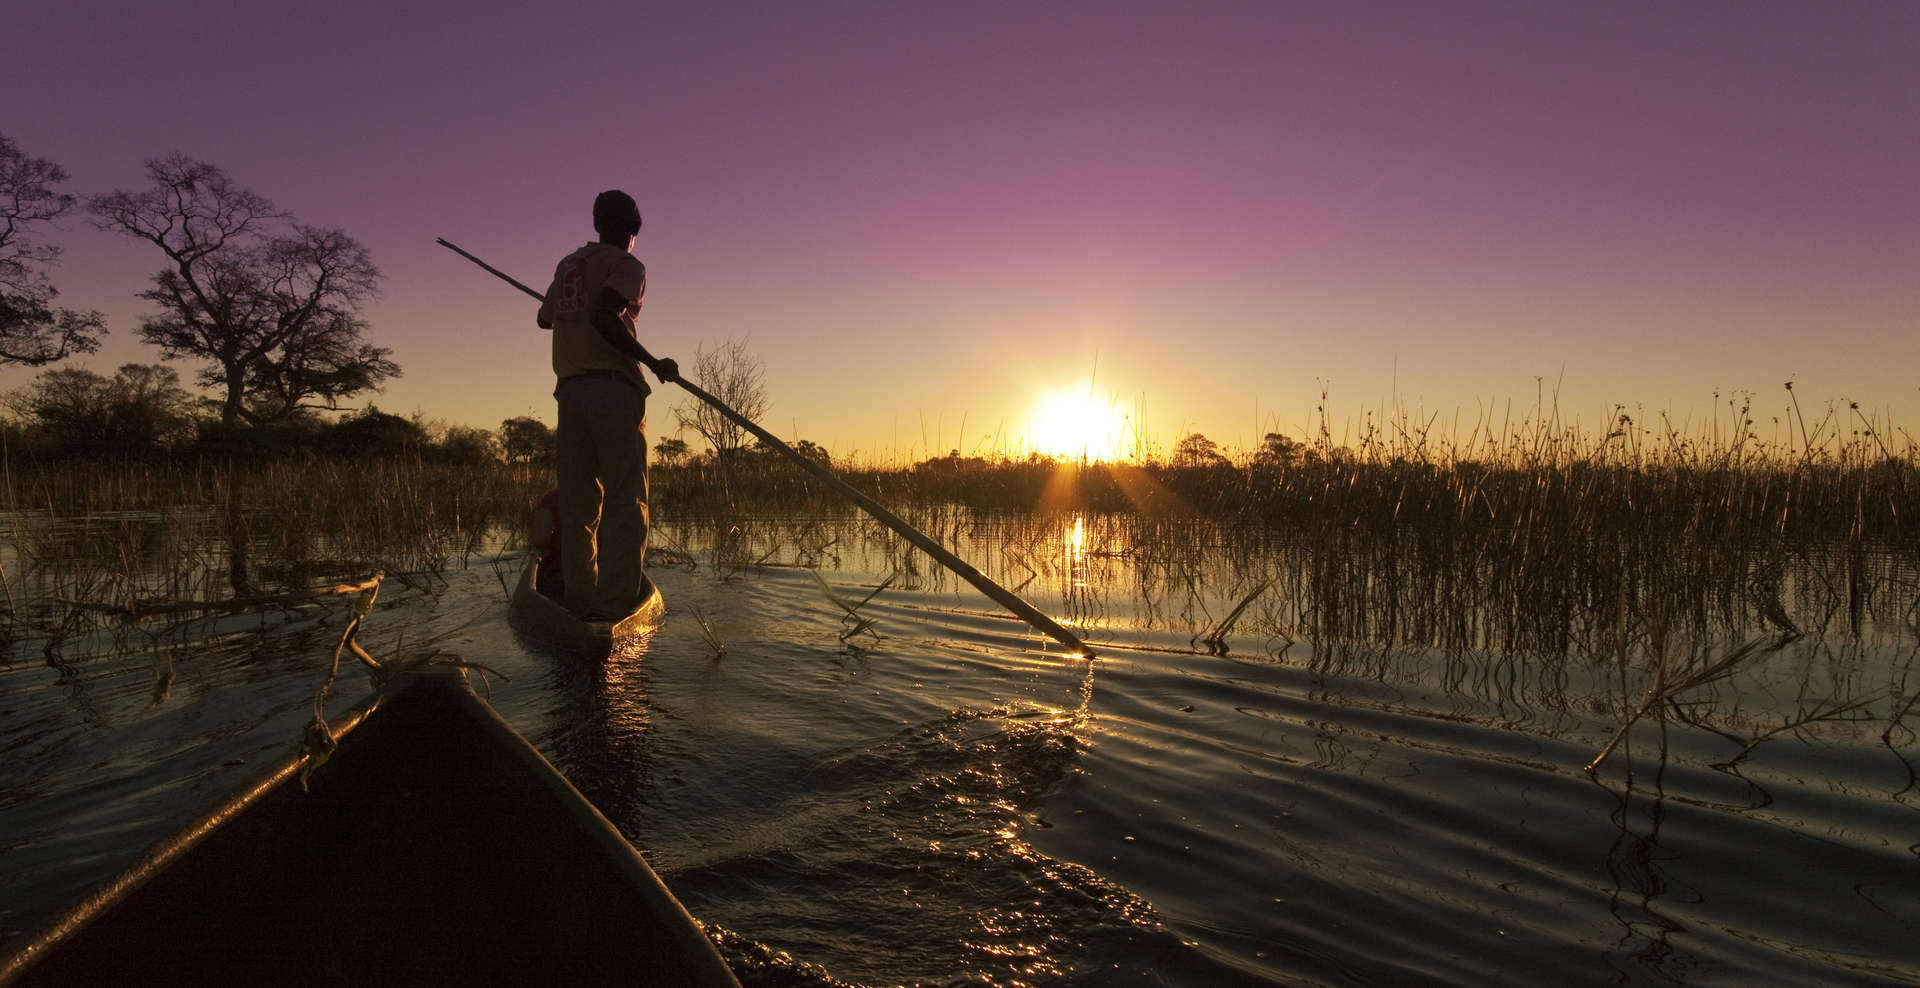 The sun setting over the Okavango Delta from the view of a traditional mokoro (canoe)